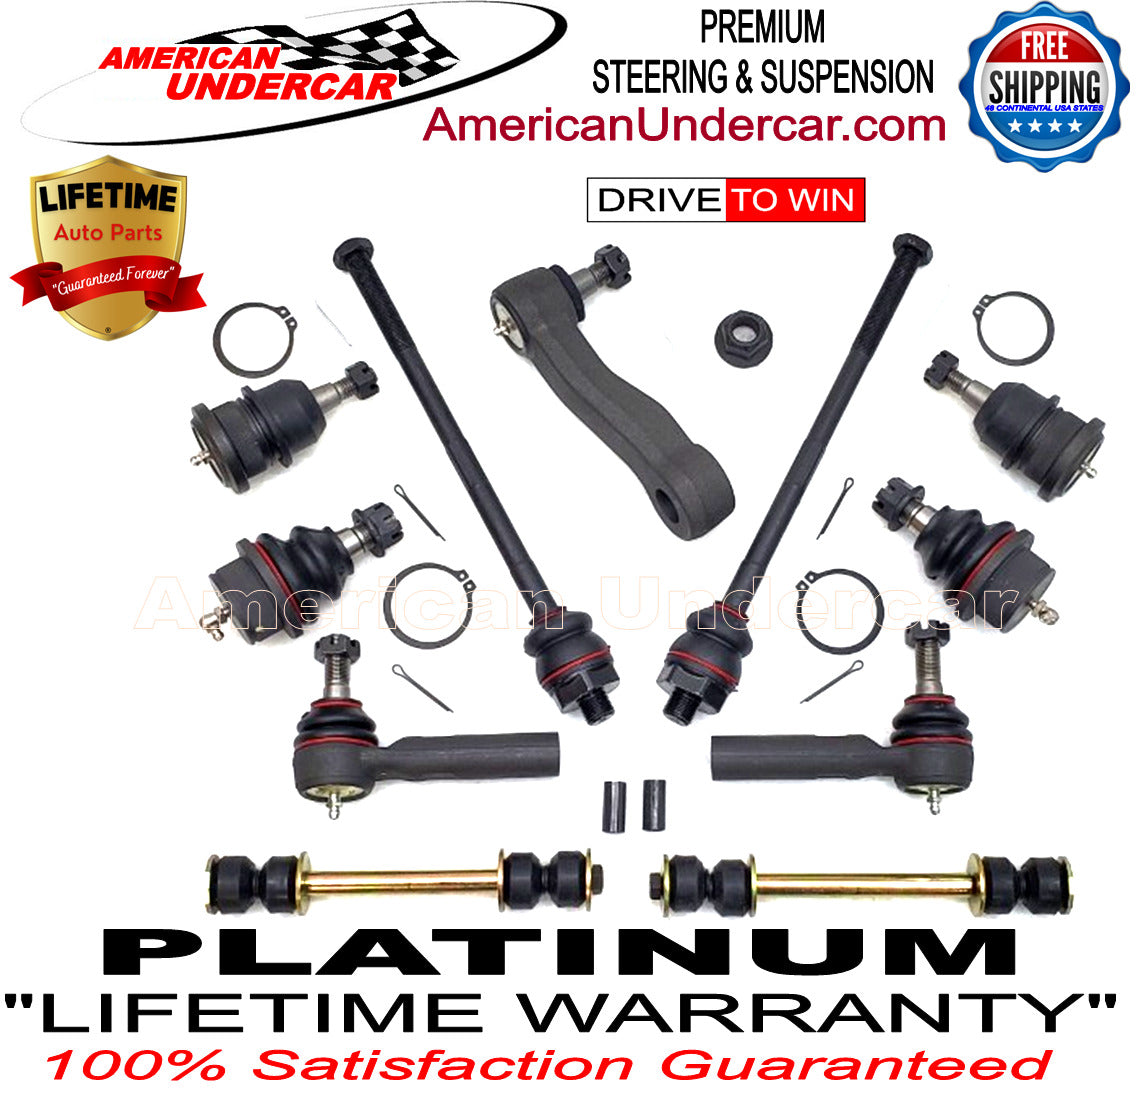 Lifetime Ball Joint Tie Rod Steering Kit for 1999-2007 Chevrolet, GMC, Cadillac 2WD, 4x4